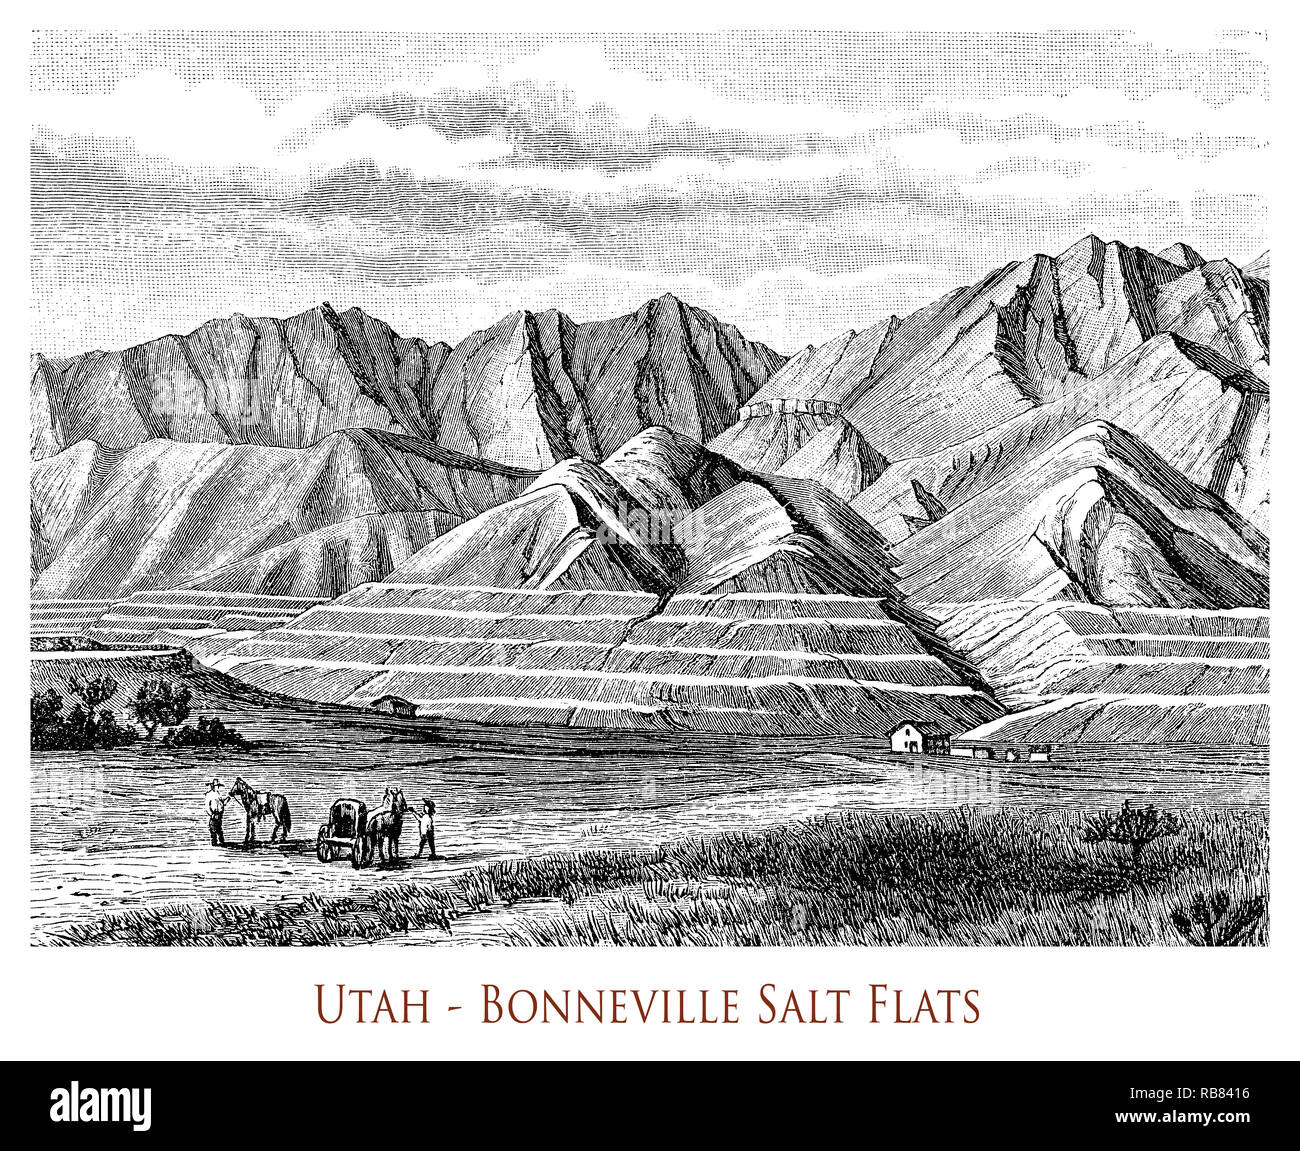 Vintage engraving of Utah's  Bonneville Salt Flats, mountains and hills break up the flat landscape covered by a thick crust of salty soil white like snow Stock Photo